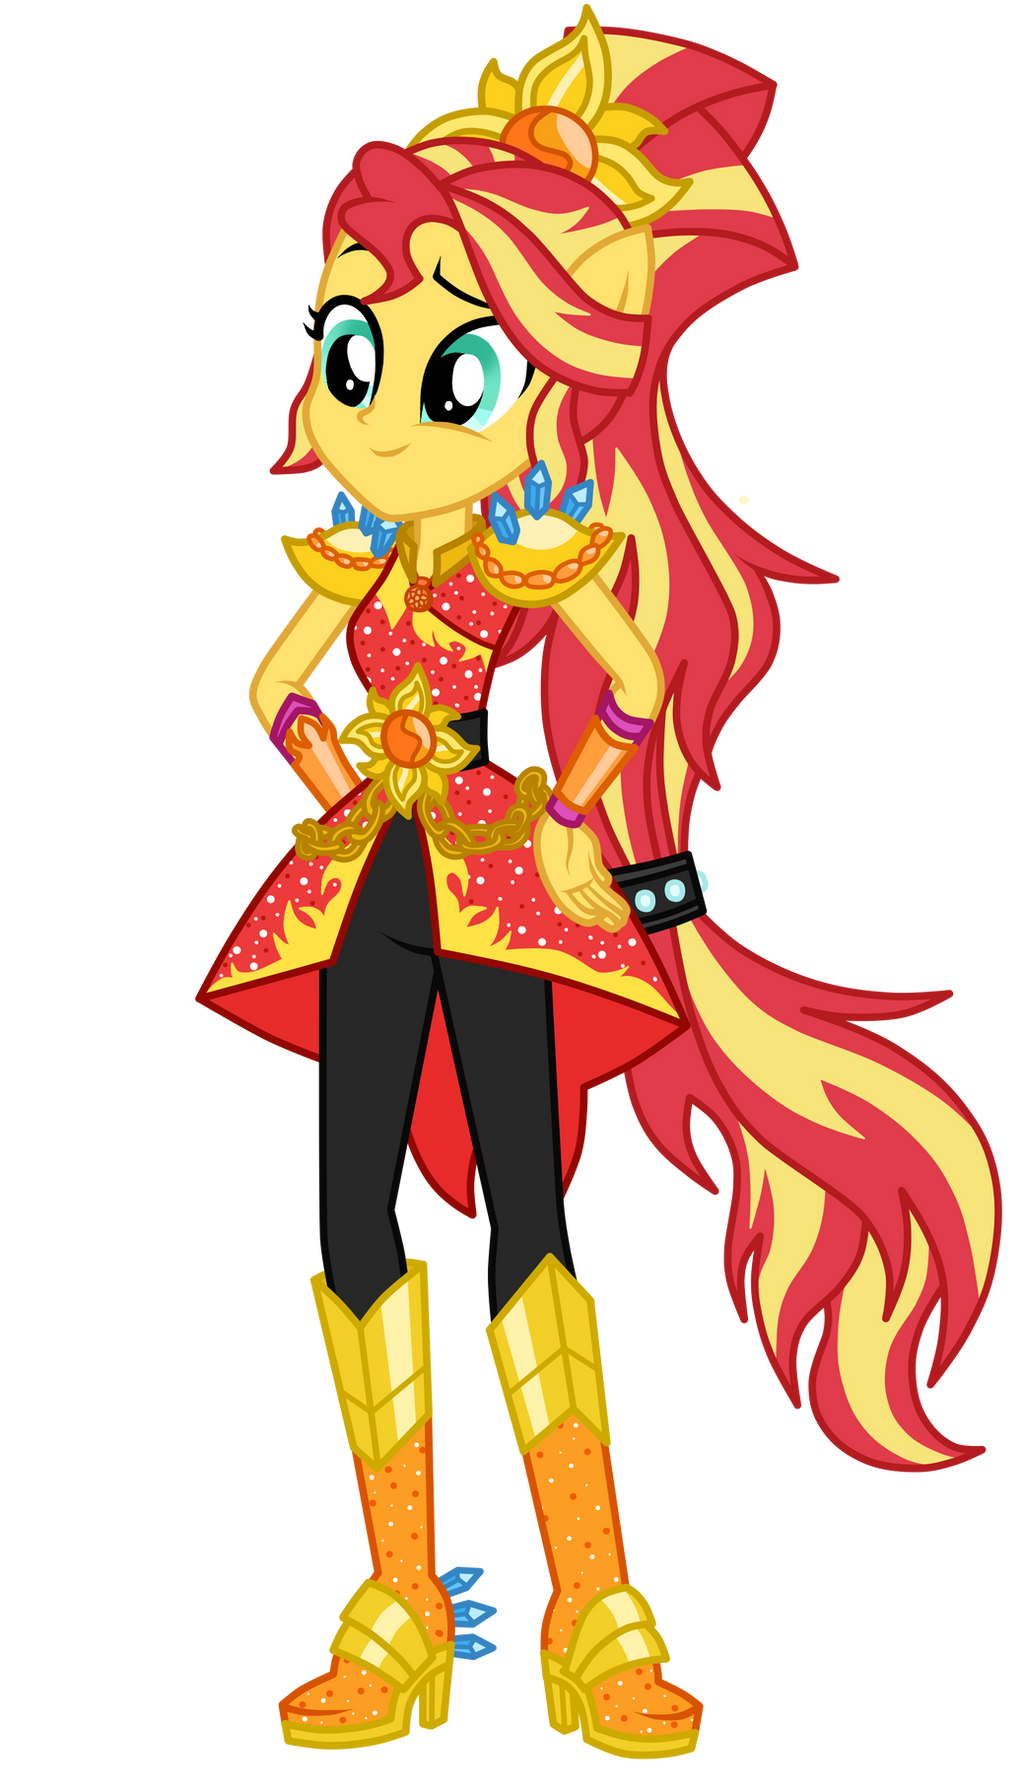 [Legend of Everfree] Sunset Shimmer by MixiePie on 